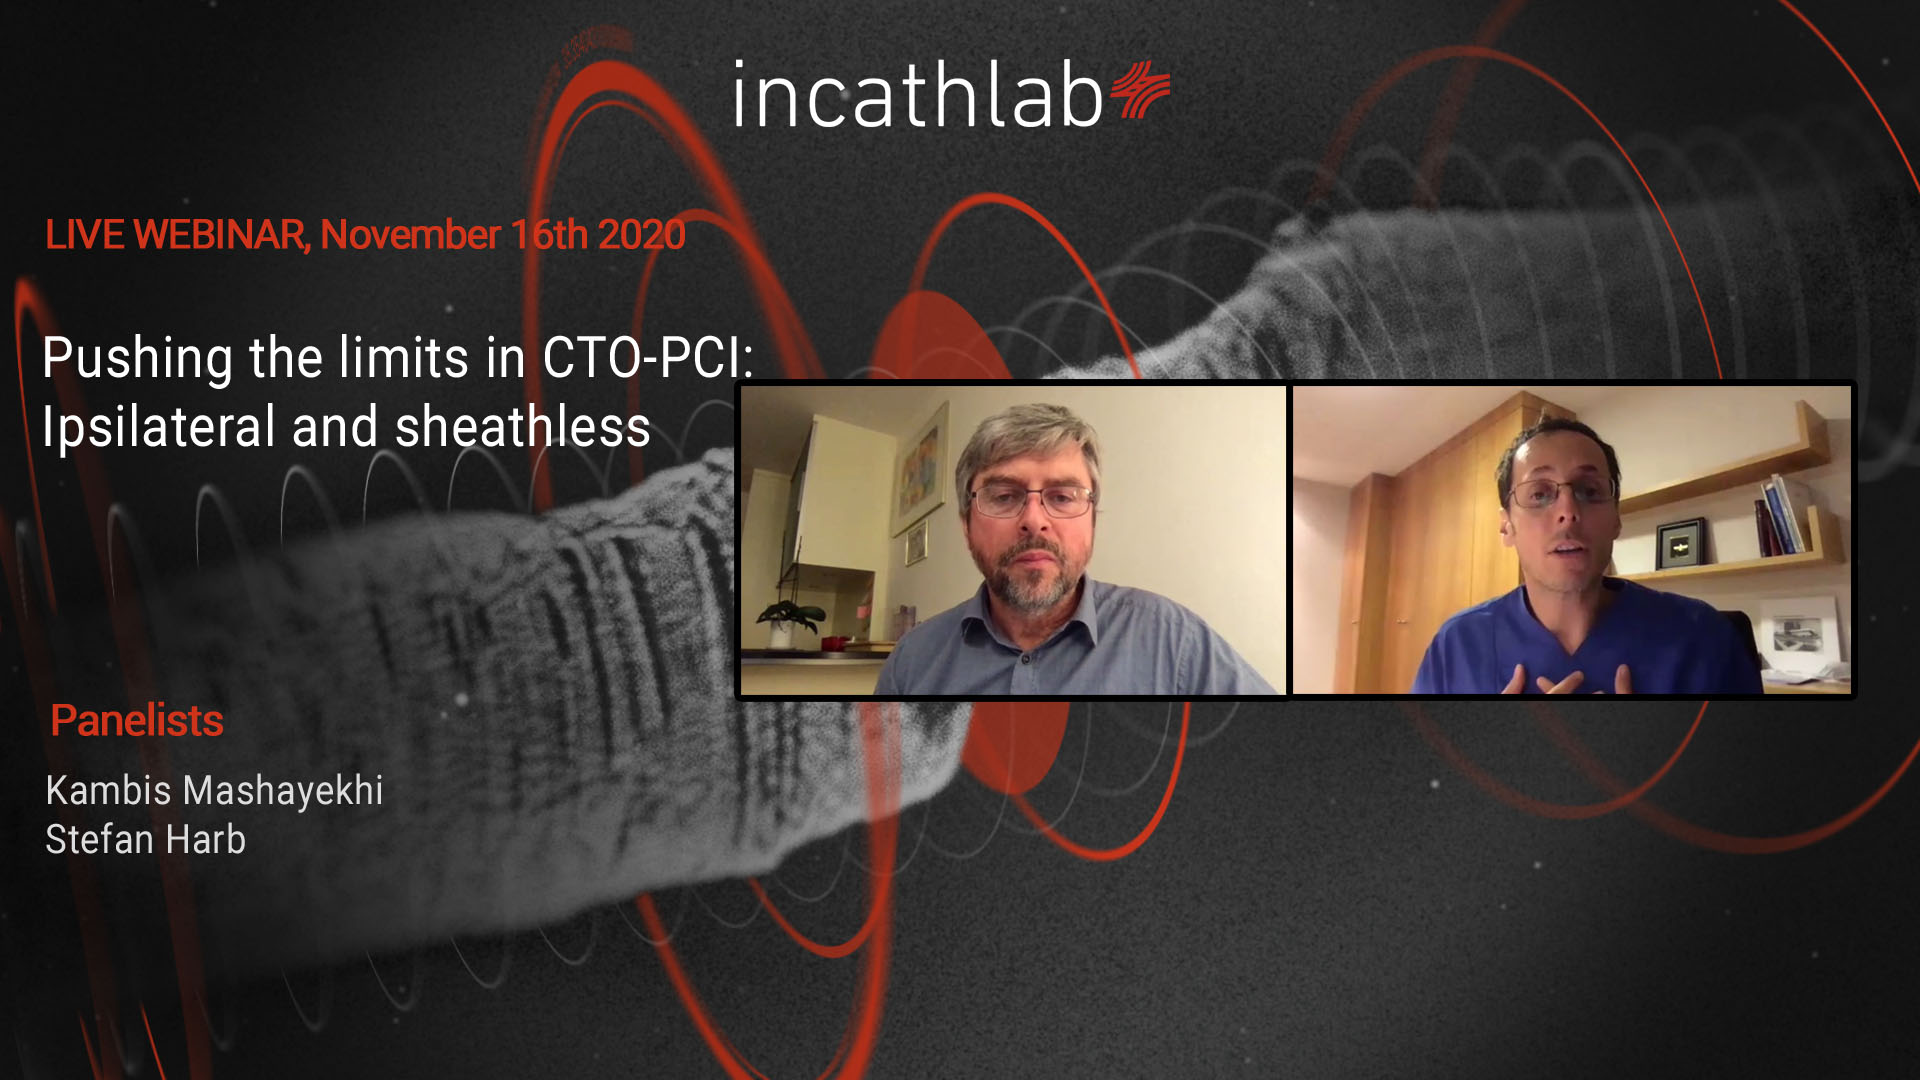 Pushing the limits in CTO-PCI: Ipsilateral and sheathless